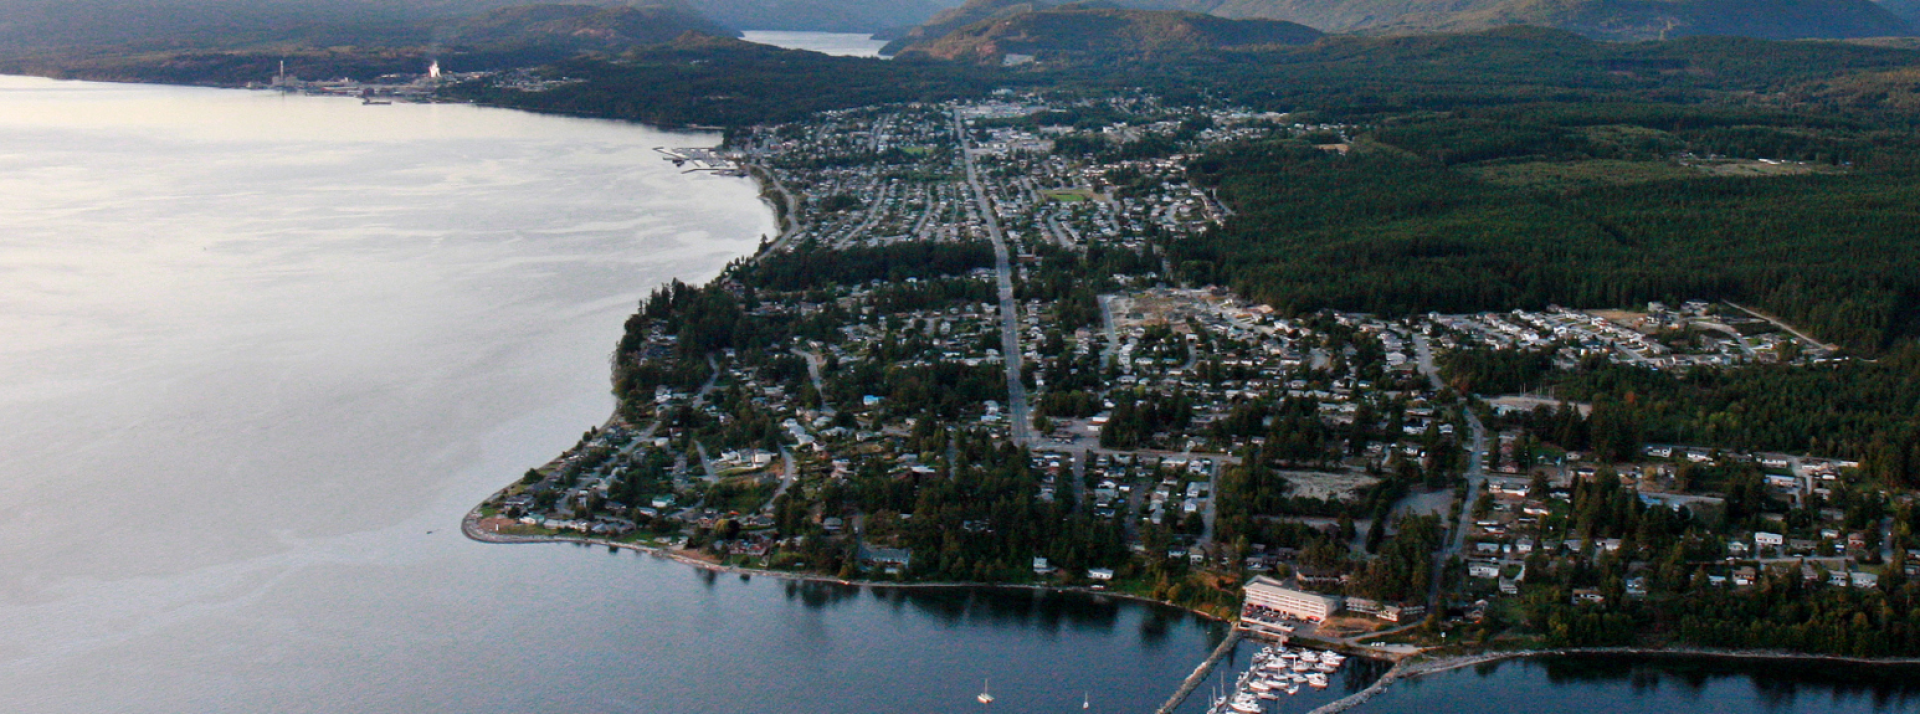 Coastline aerial view of Powell River